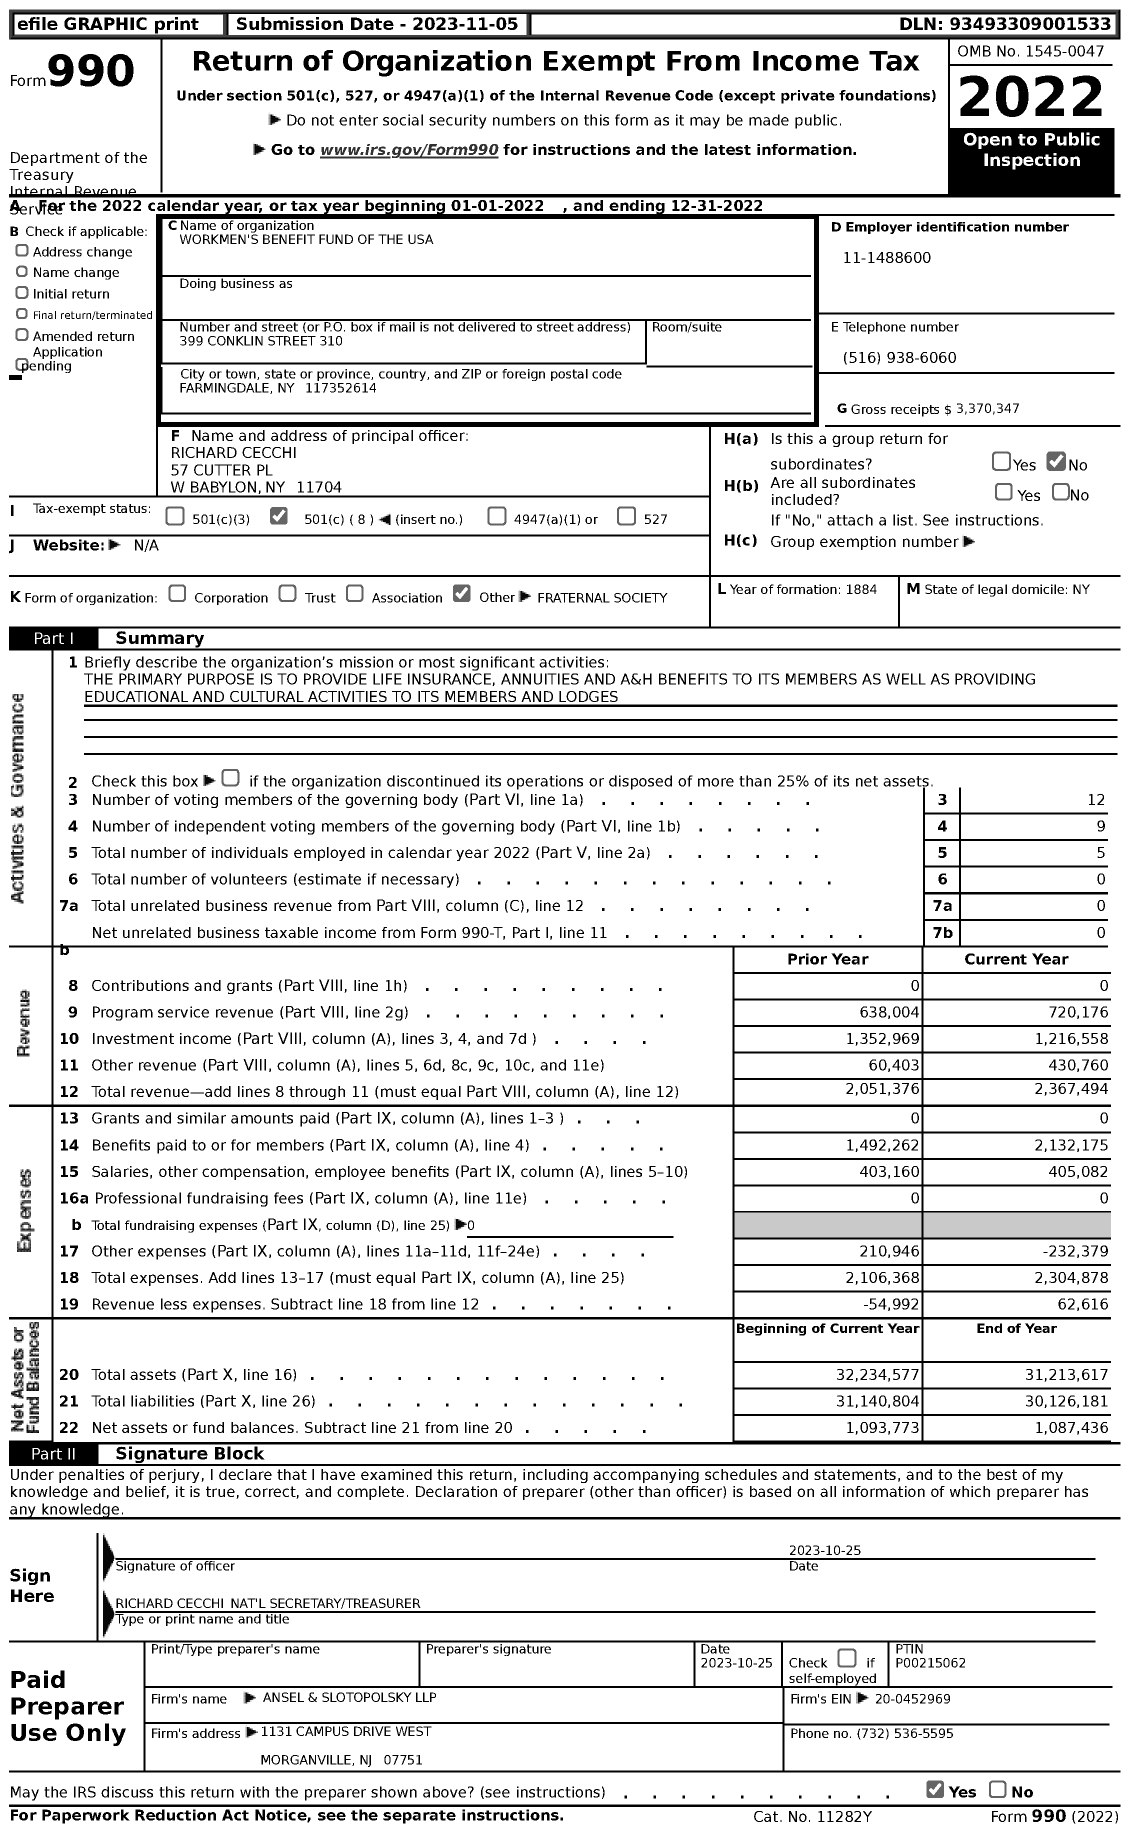 Image of first page of 2022 Form 990 for Workmen's Benefit Fund of the USA (WBF)